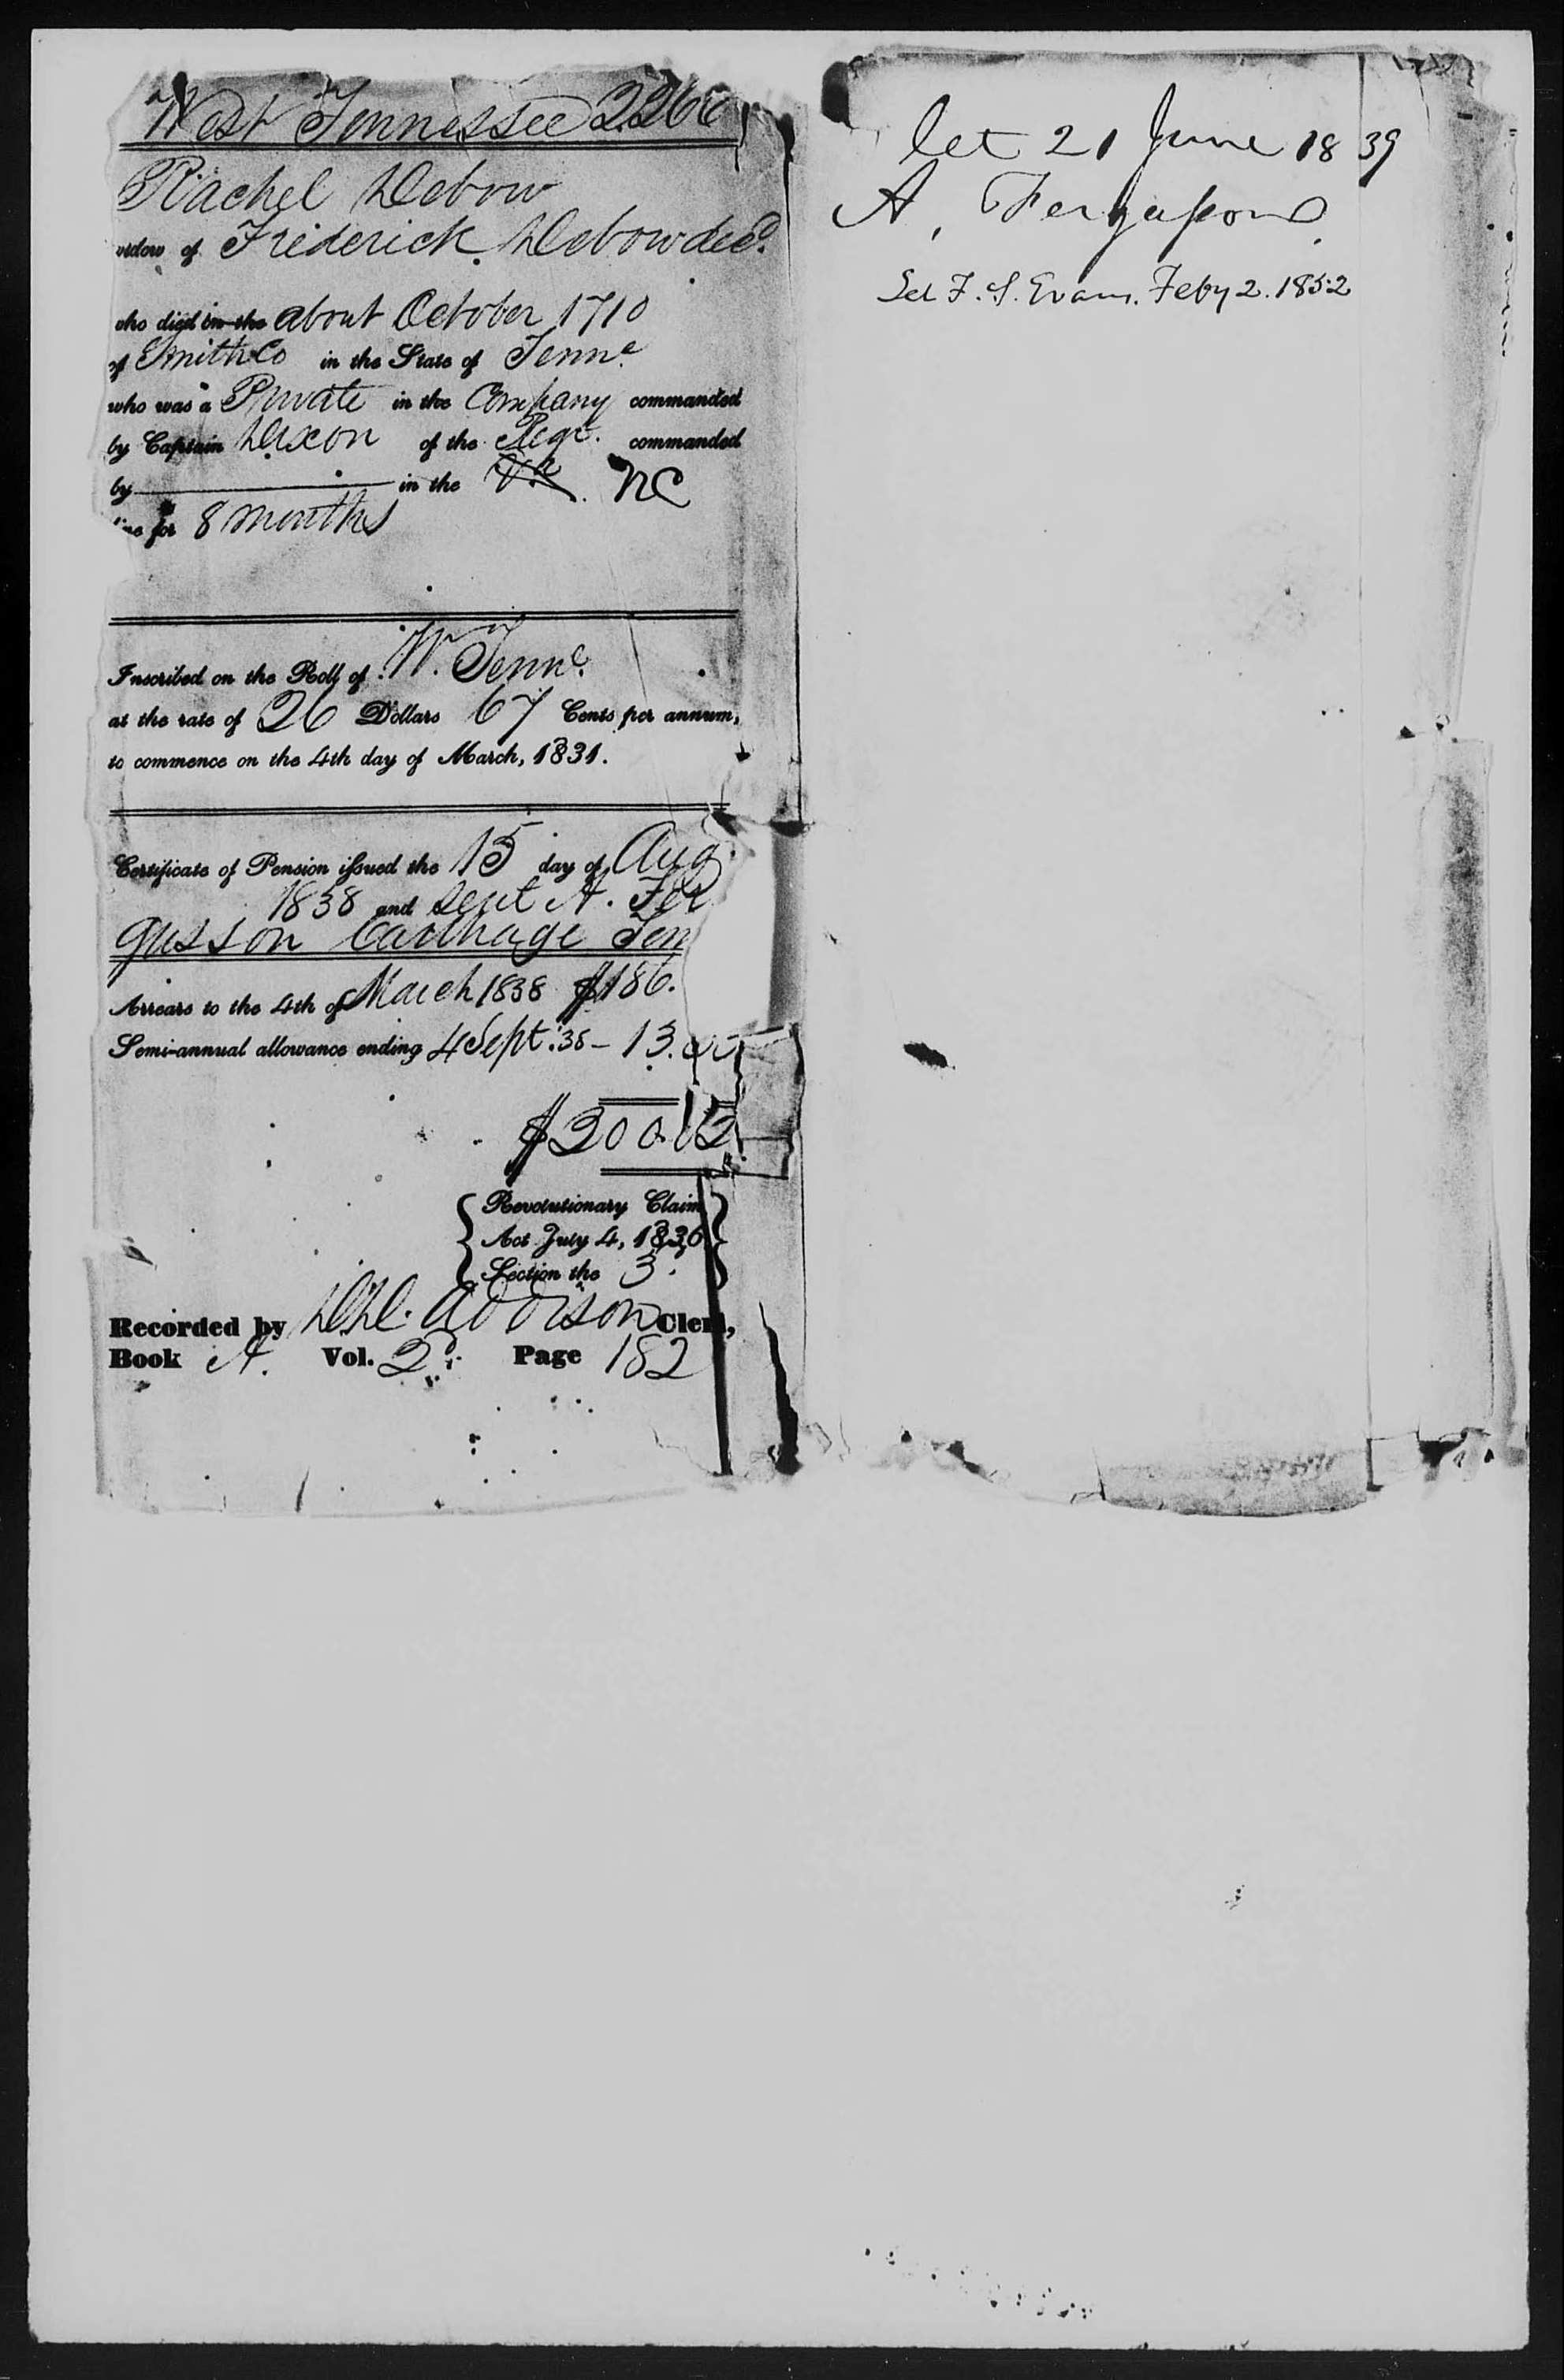 Docket for Widow's Pension from the U.S. Pension Office for Rachel Debow, 15 August 1838